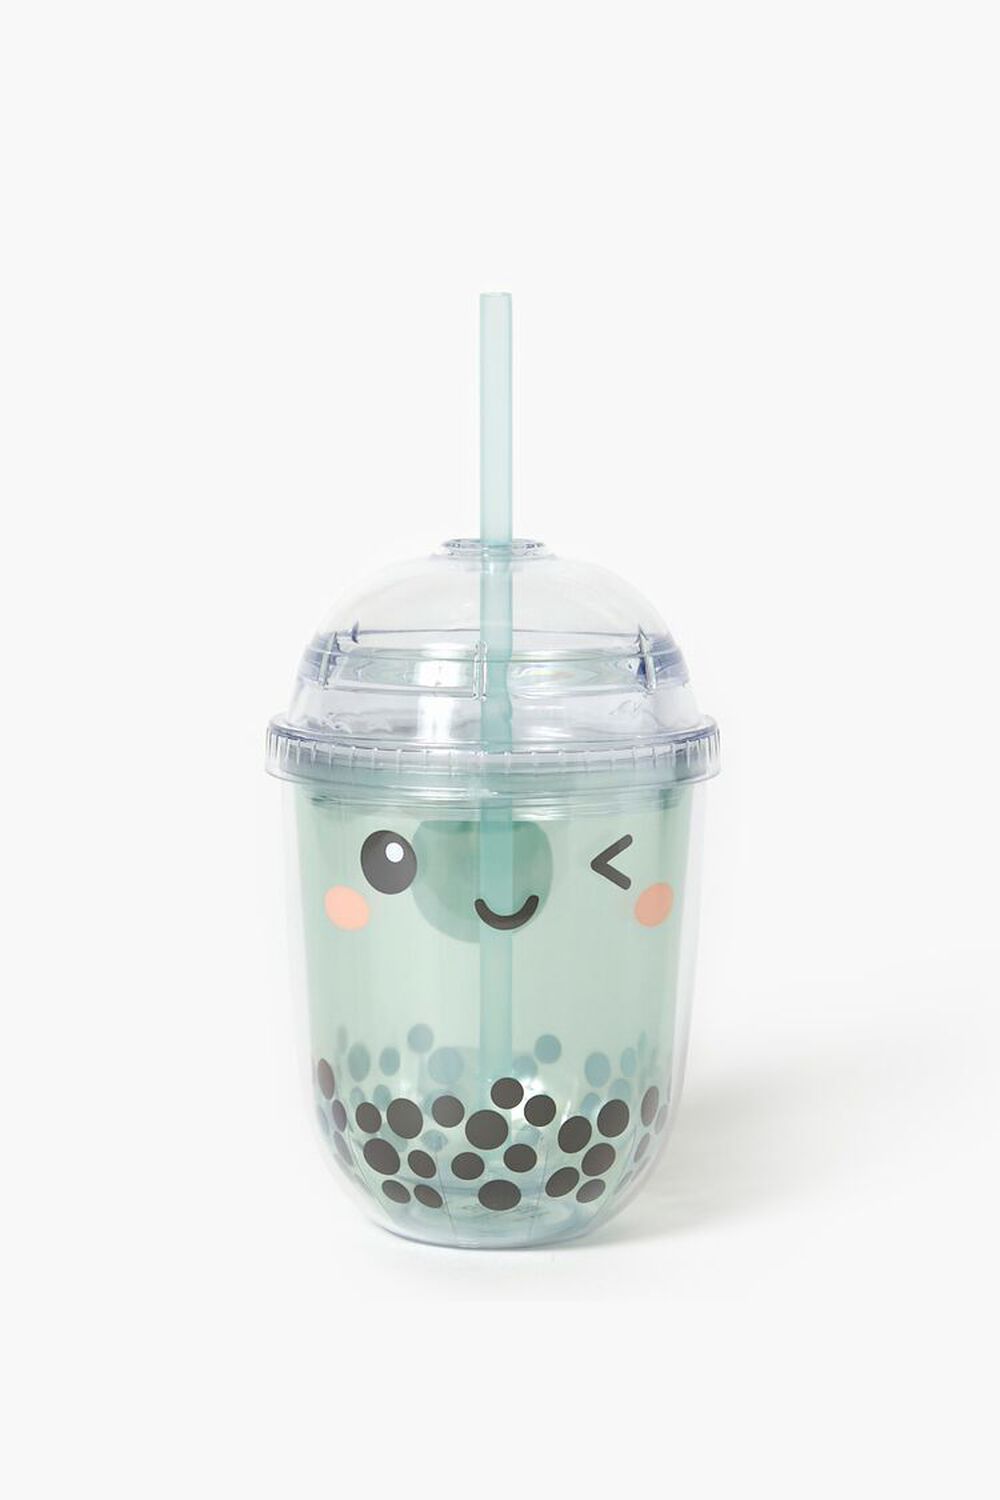 YUMBUCHA Reusable Boba Tumbler & Straw Set with Stainless Steel Straw - Reusable Bubble Tea Cups - Includes Cup Carrier, Sleeve & Boba Gifts - Gift